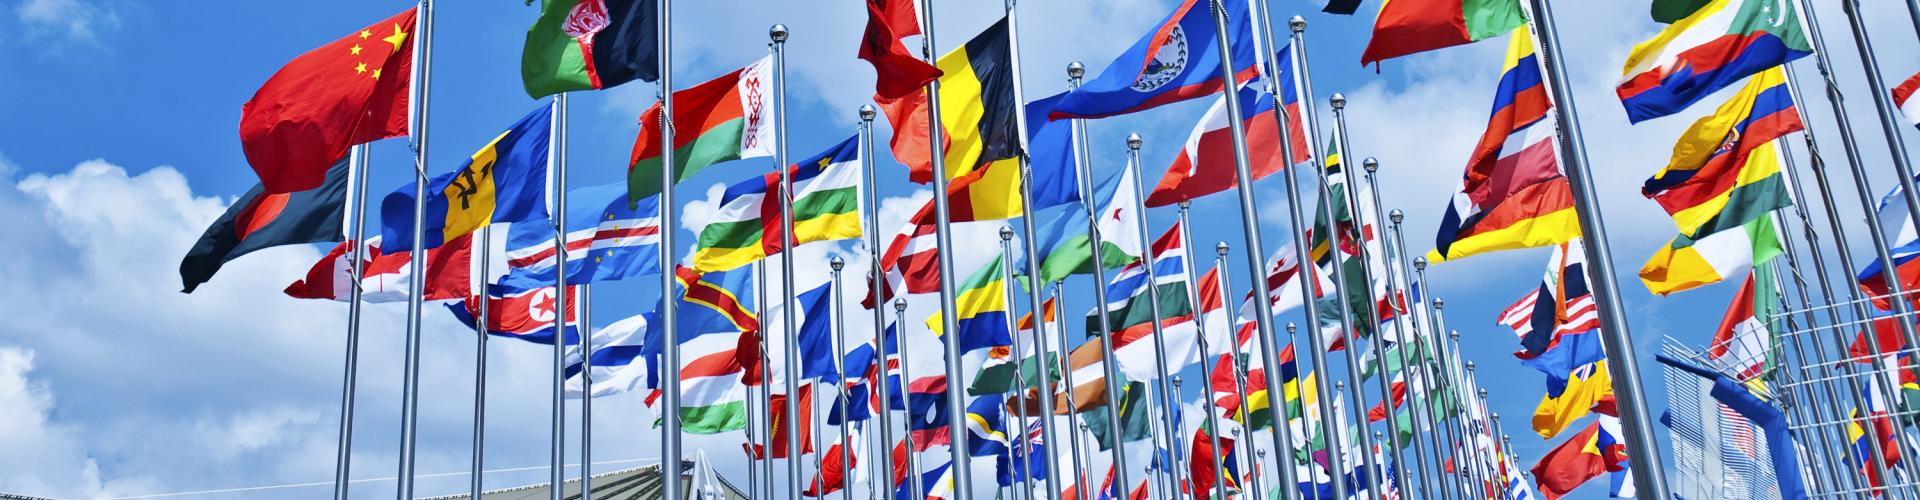 Collection of International Flags flying in the wind.